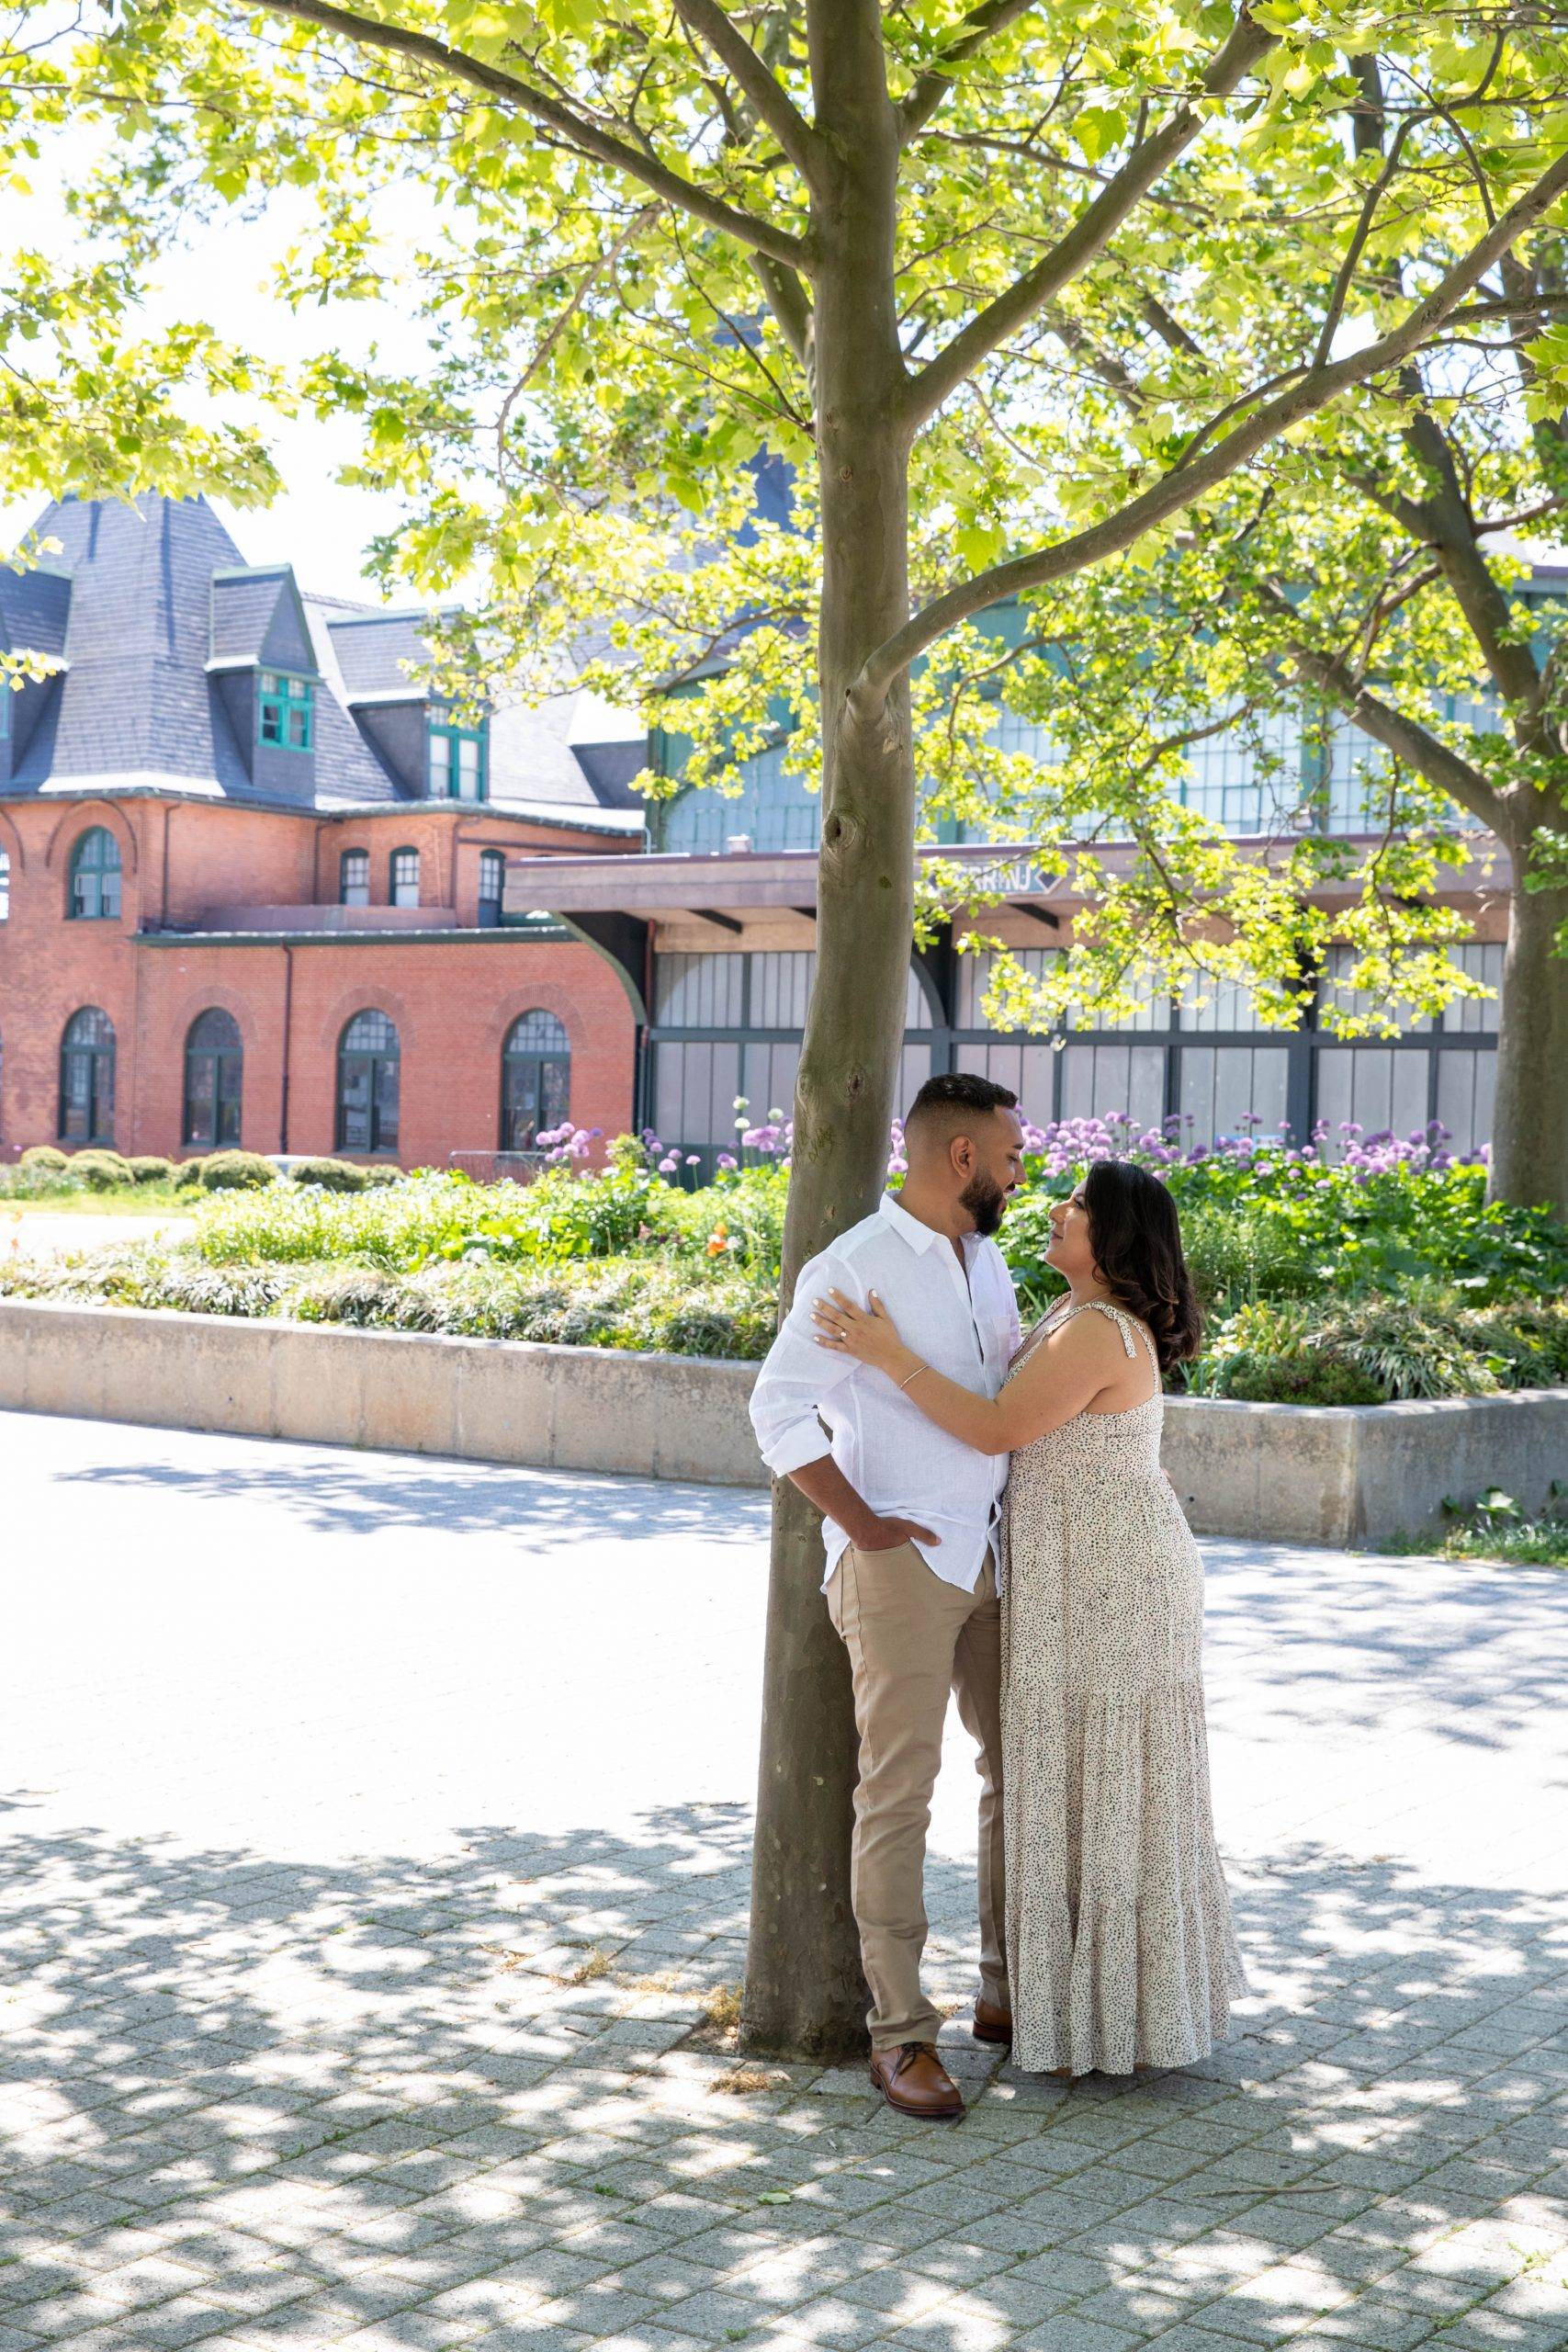 A couple embraces under a tree in front of a brick building.